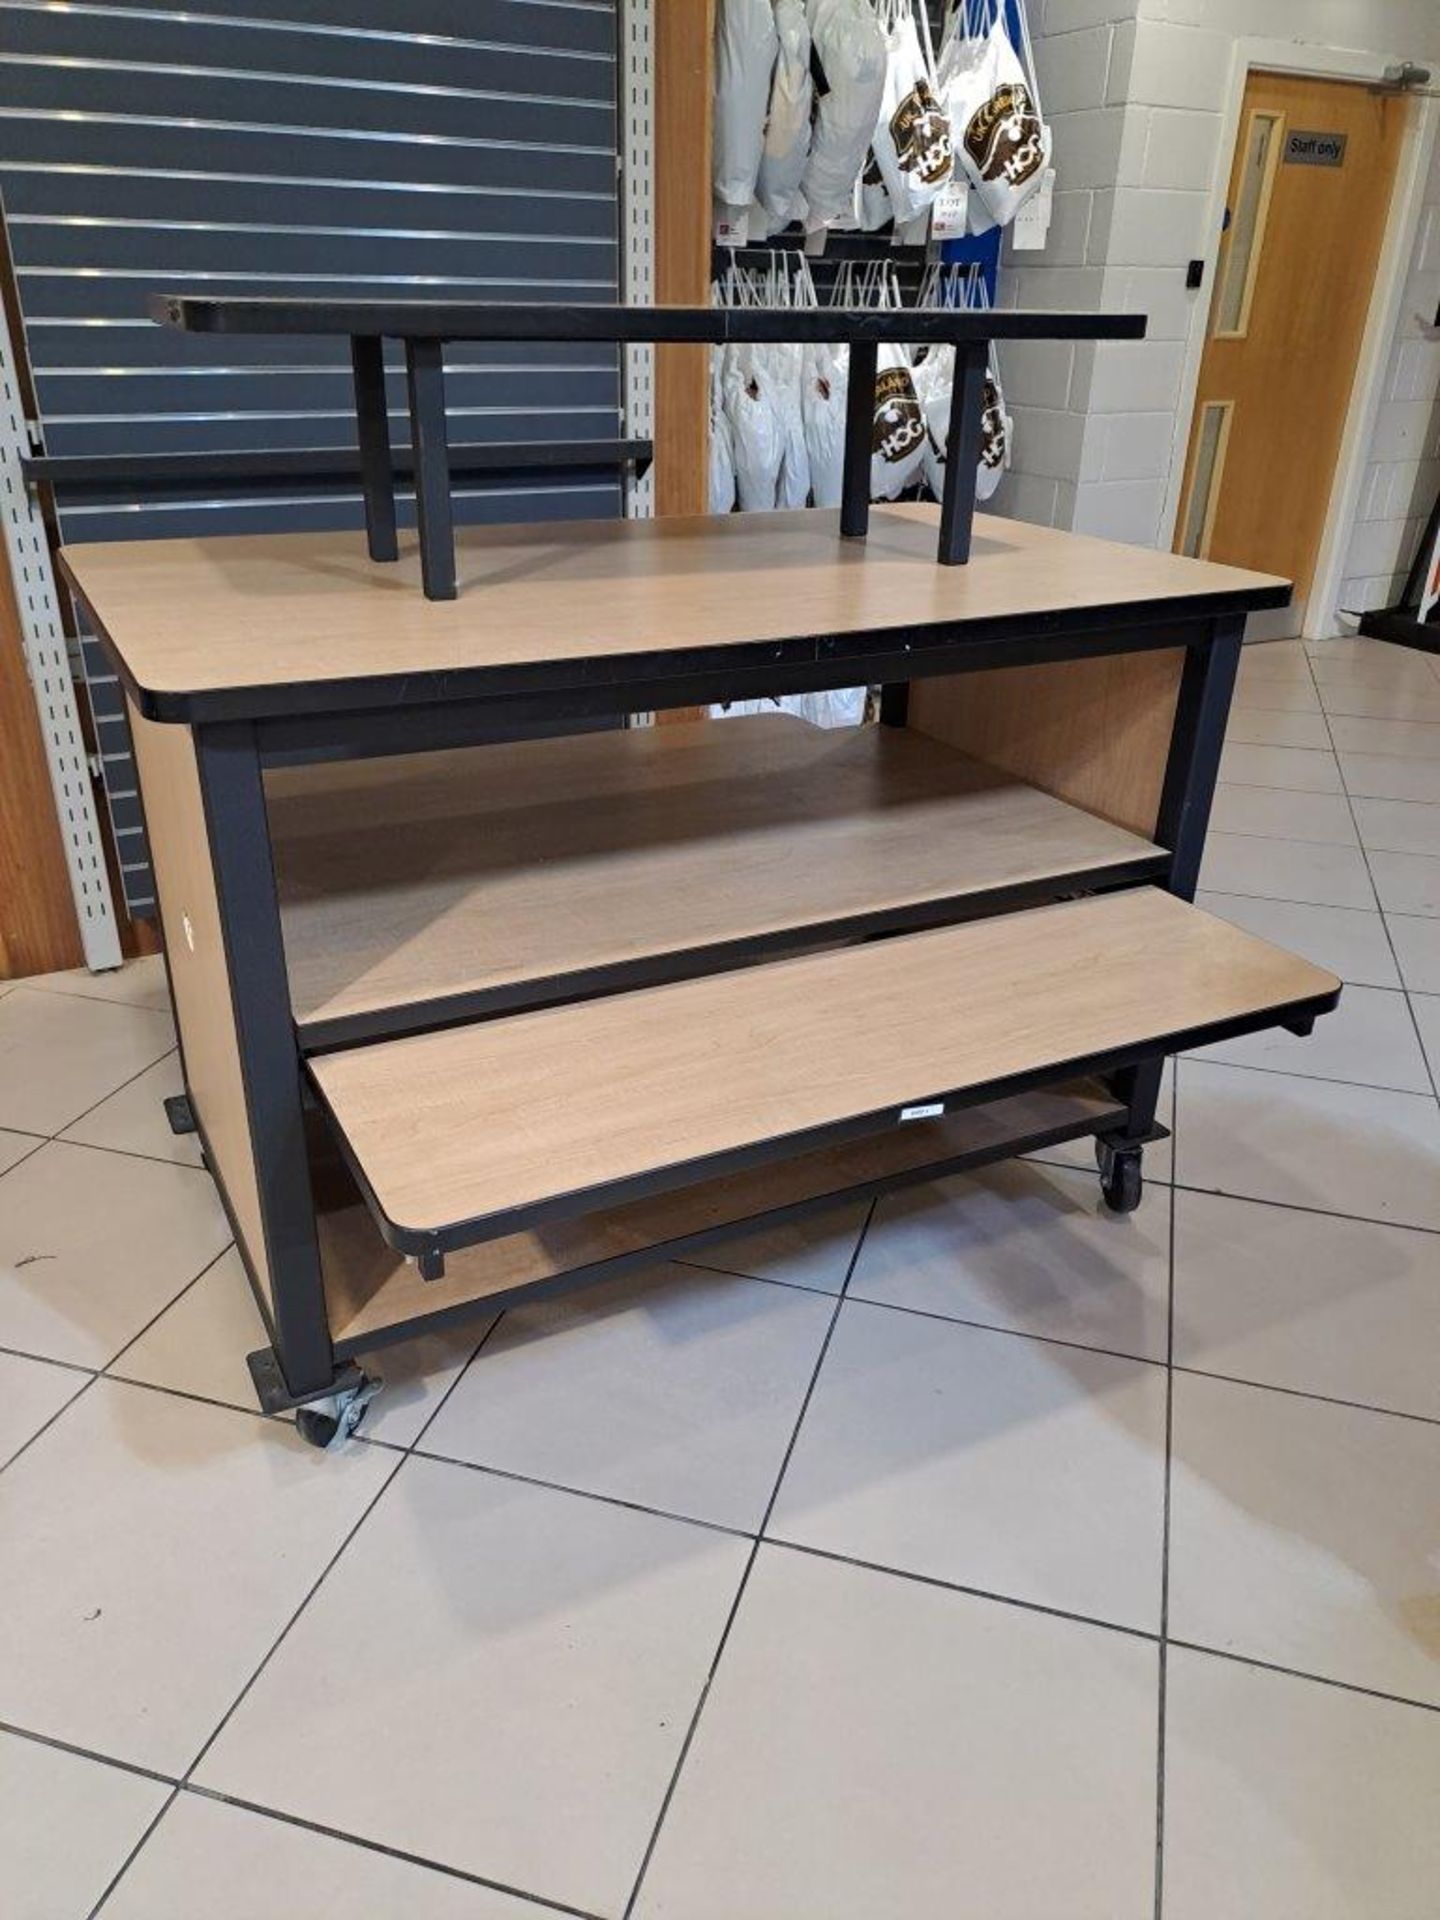 Display Table with Shelves